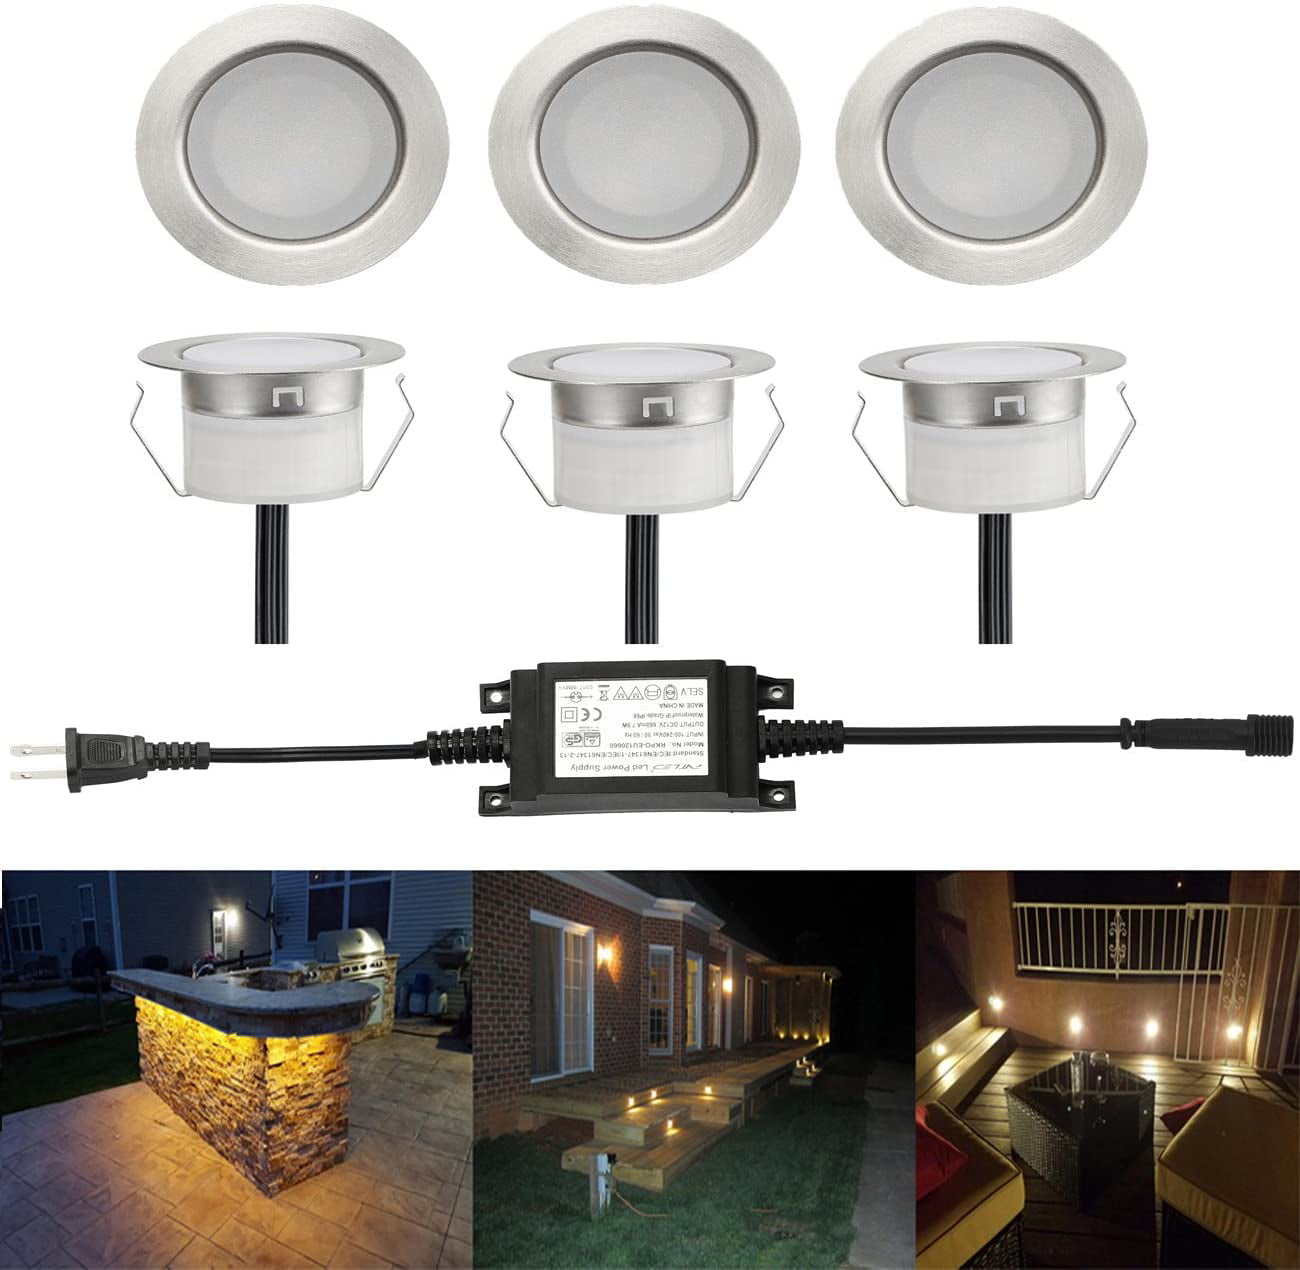 FVTLED Low Voltage LED Deck Light Kit Super Mini Stainless Steel Waterproof IP67 Recessed Wood Decking Yard Garden Patio Stairs Landscape 20pcs, Warm White